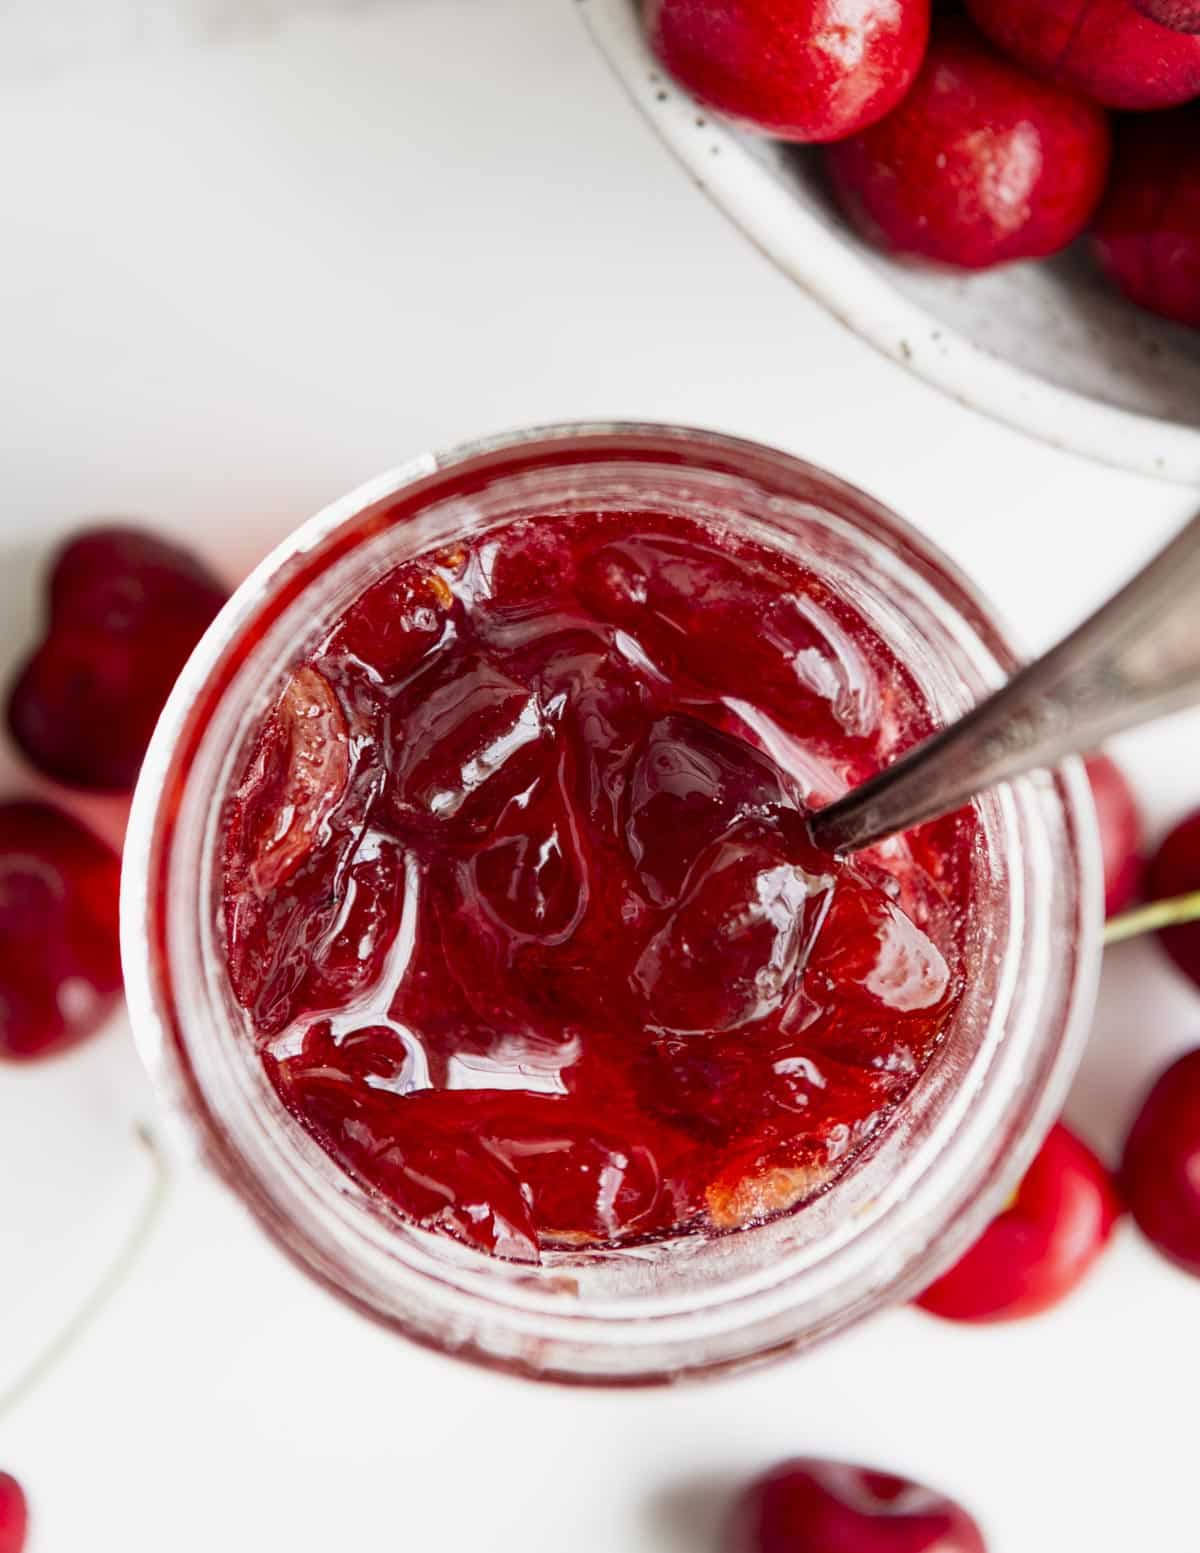 Overhead shot of a spoon in a jar of cherry jam on a white table.